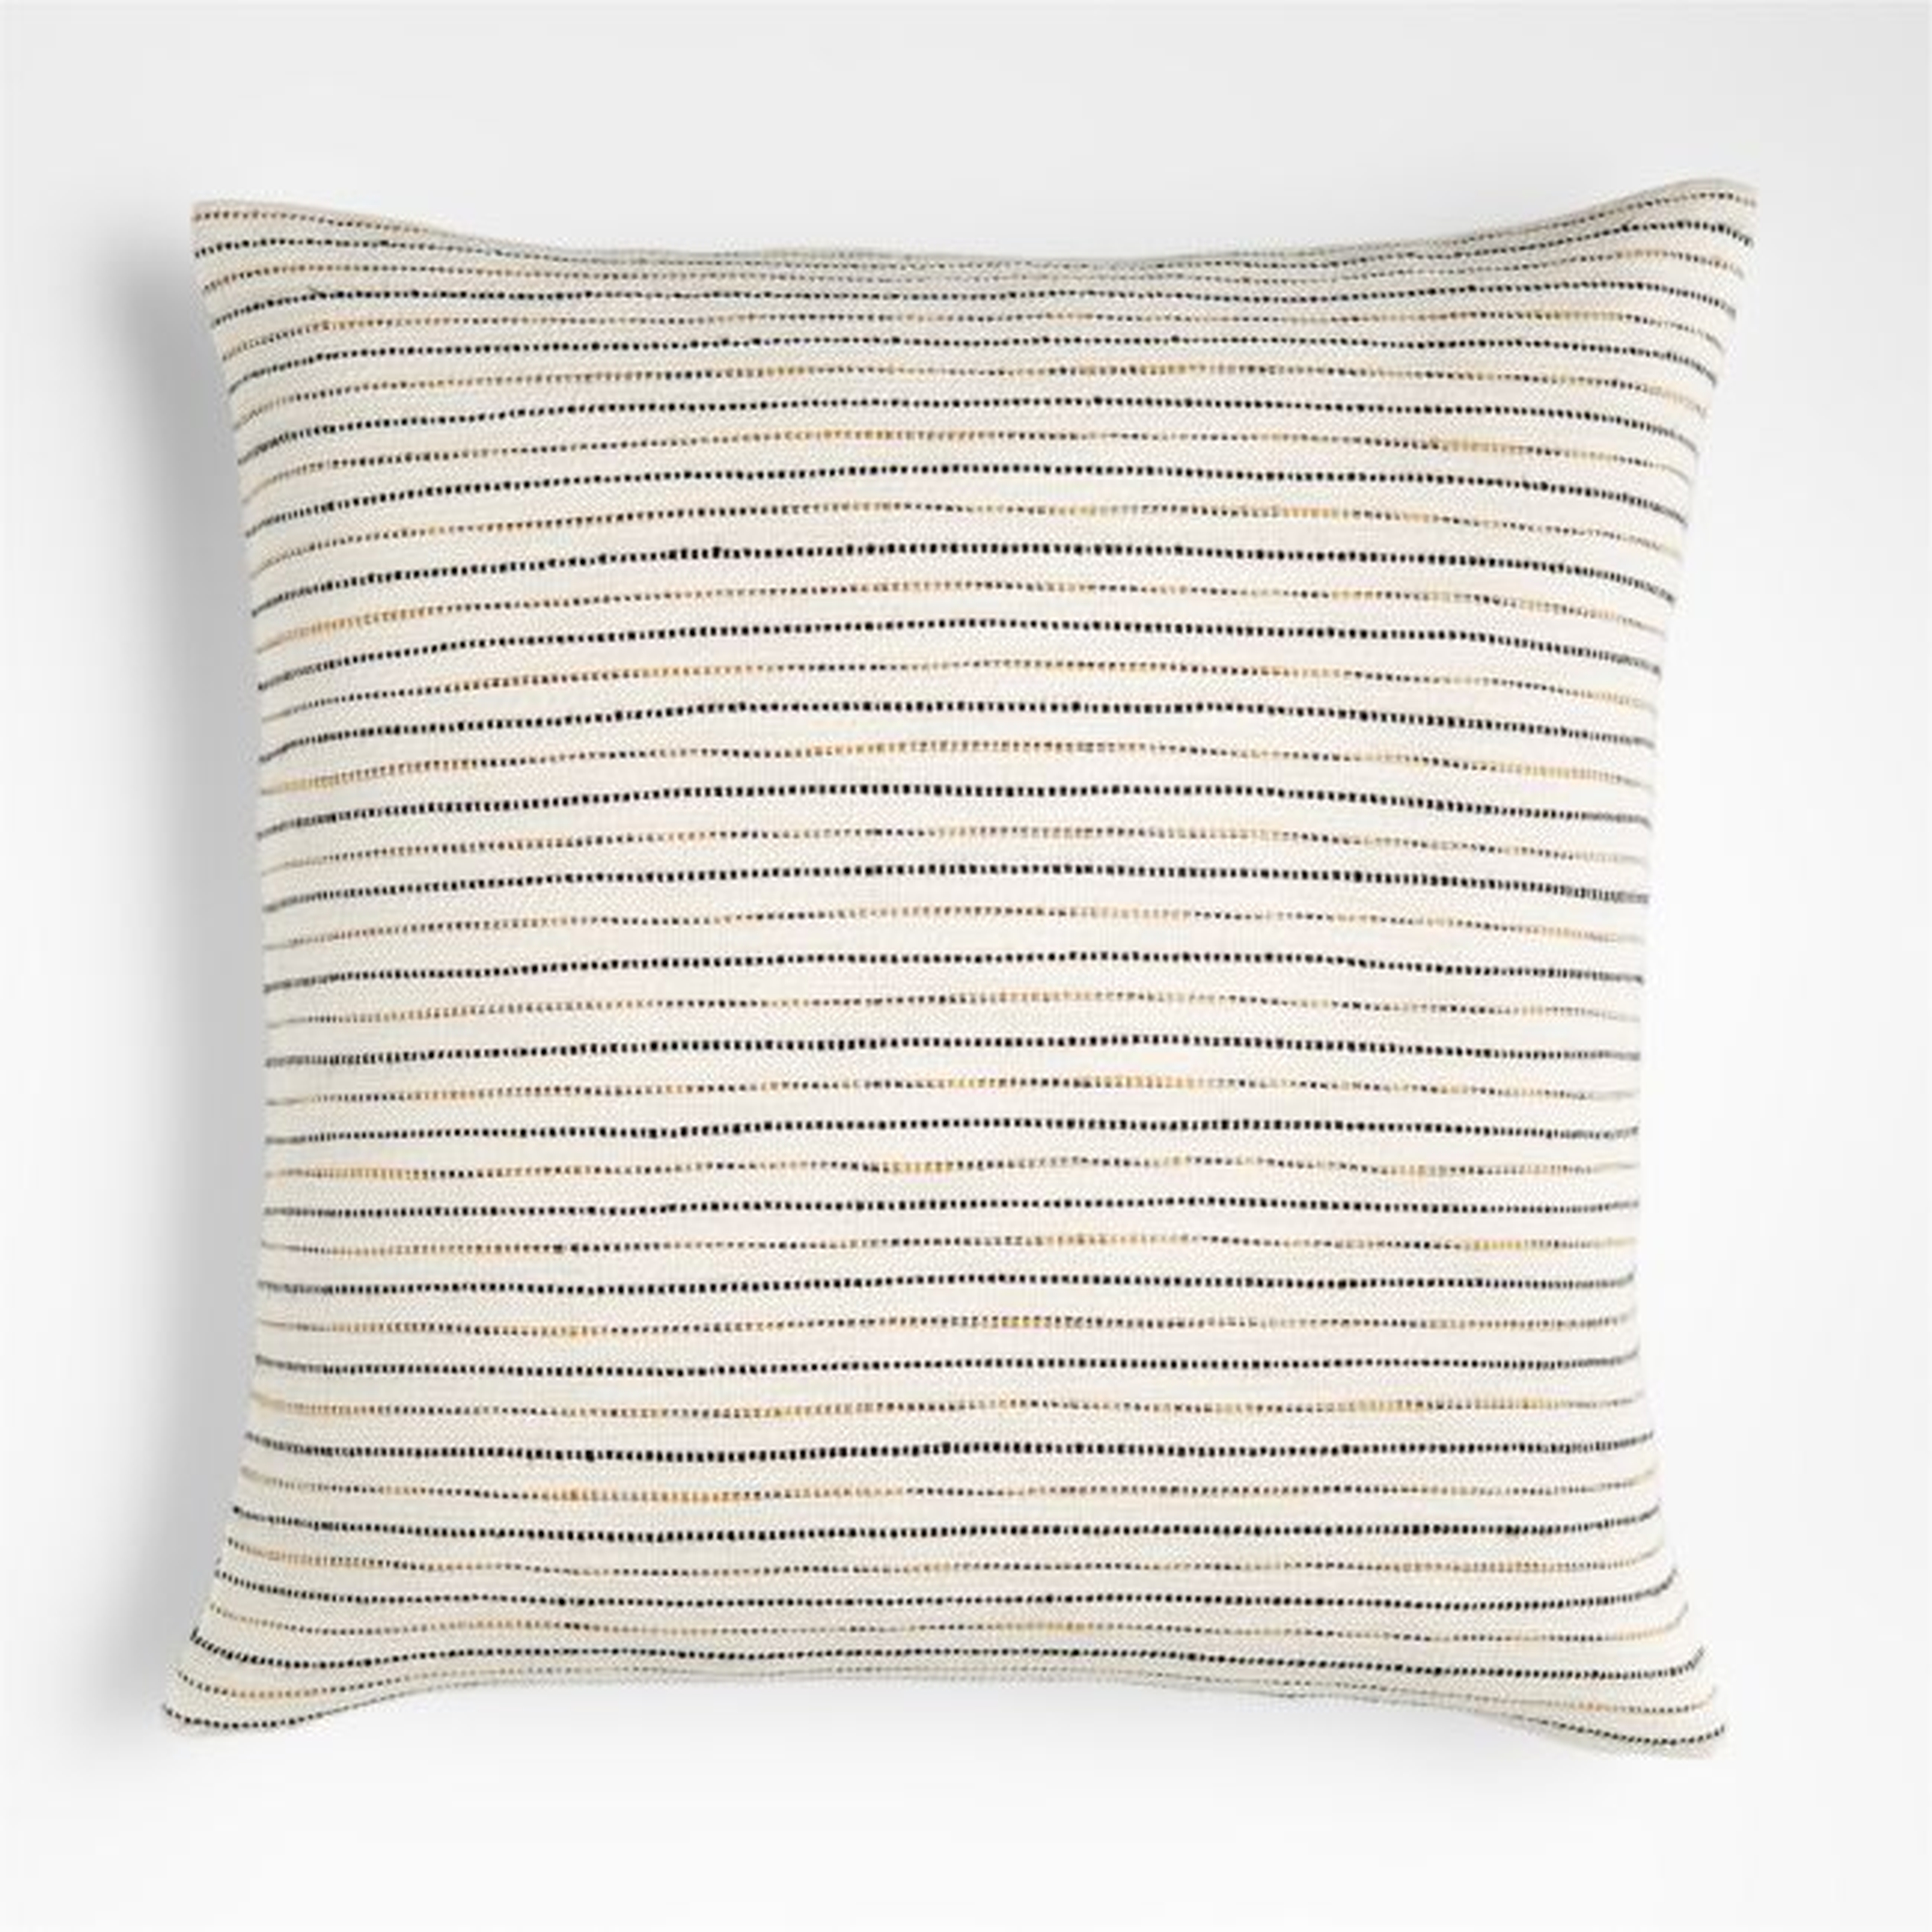 Dellana 23"x23" Striped Natural Square Throw Pillow Cover with Feather Insert - Crate and Barrel